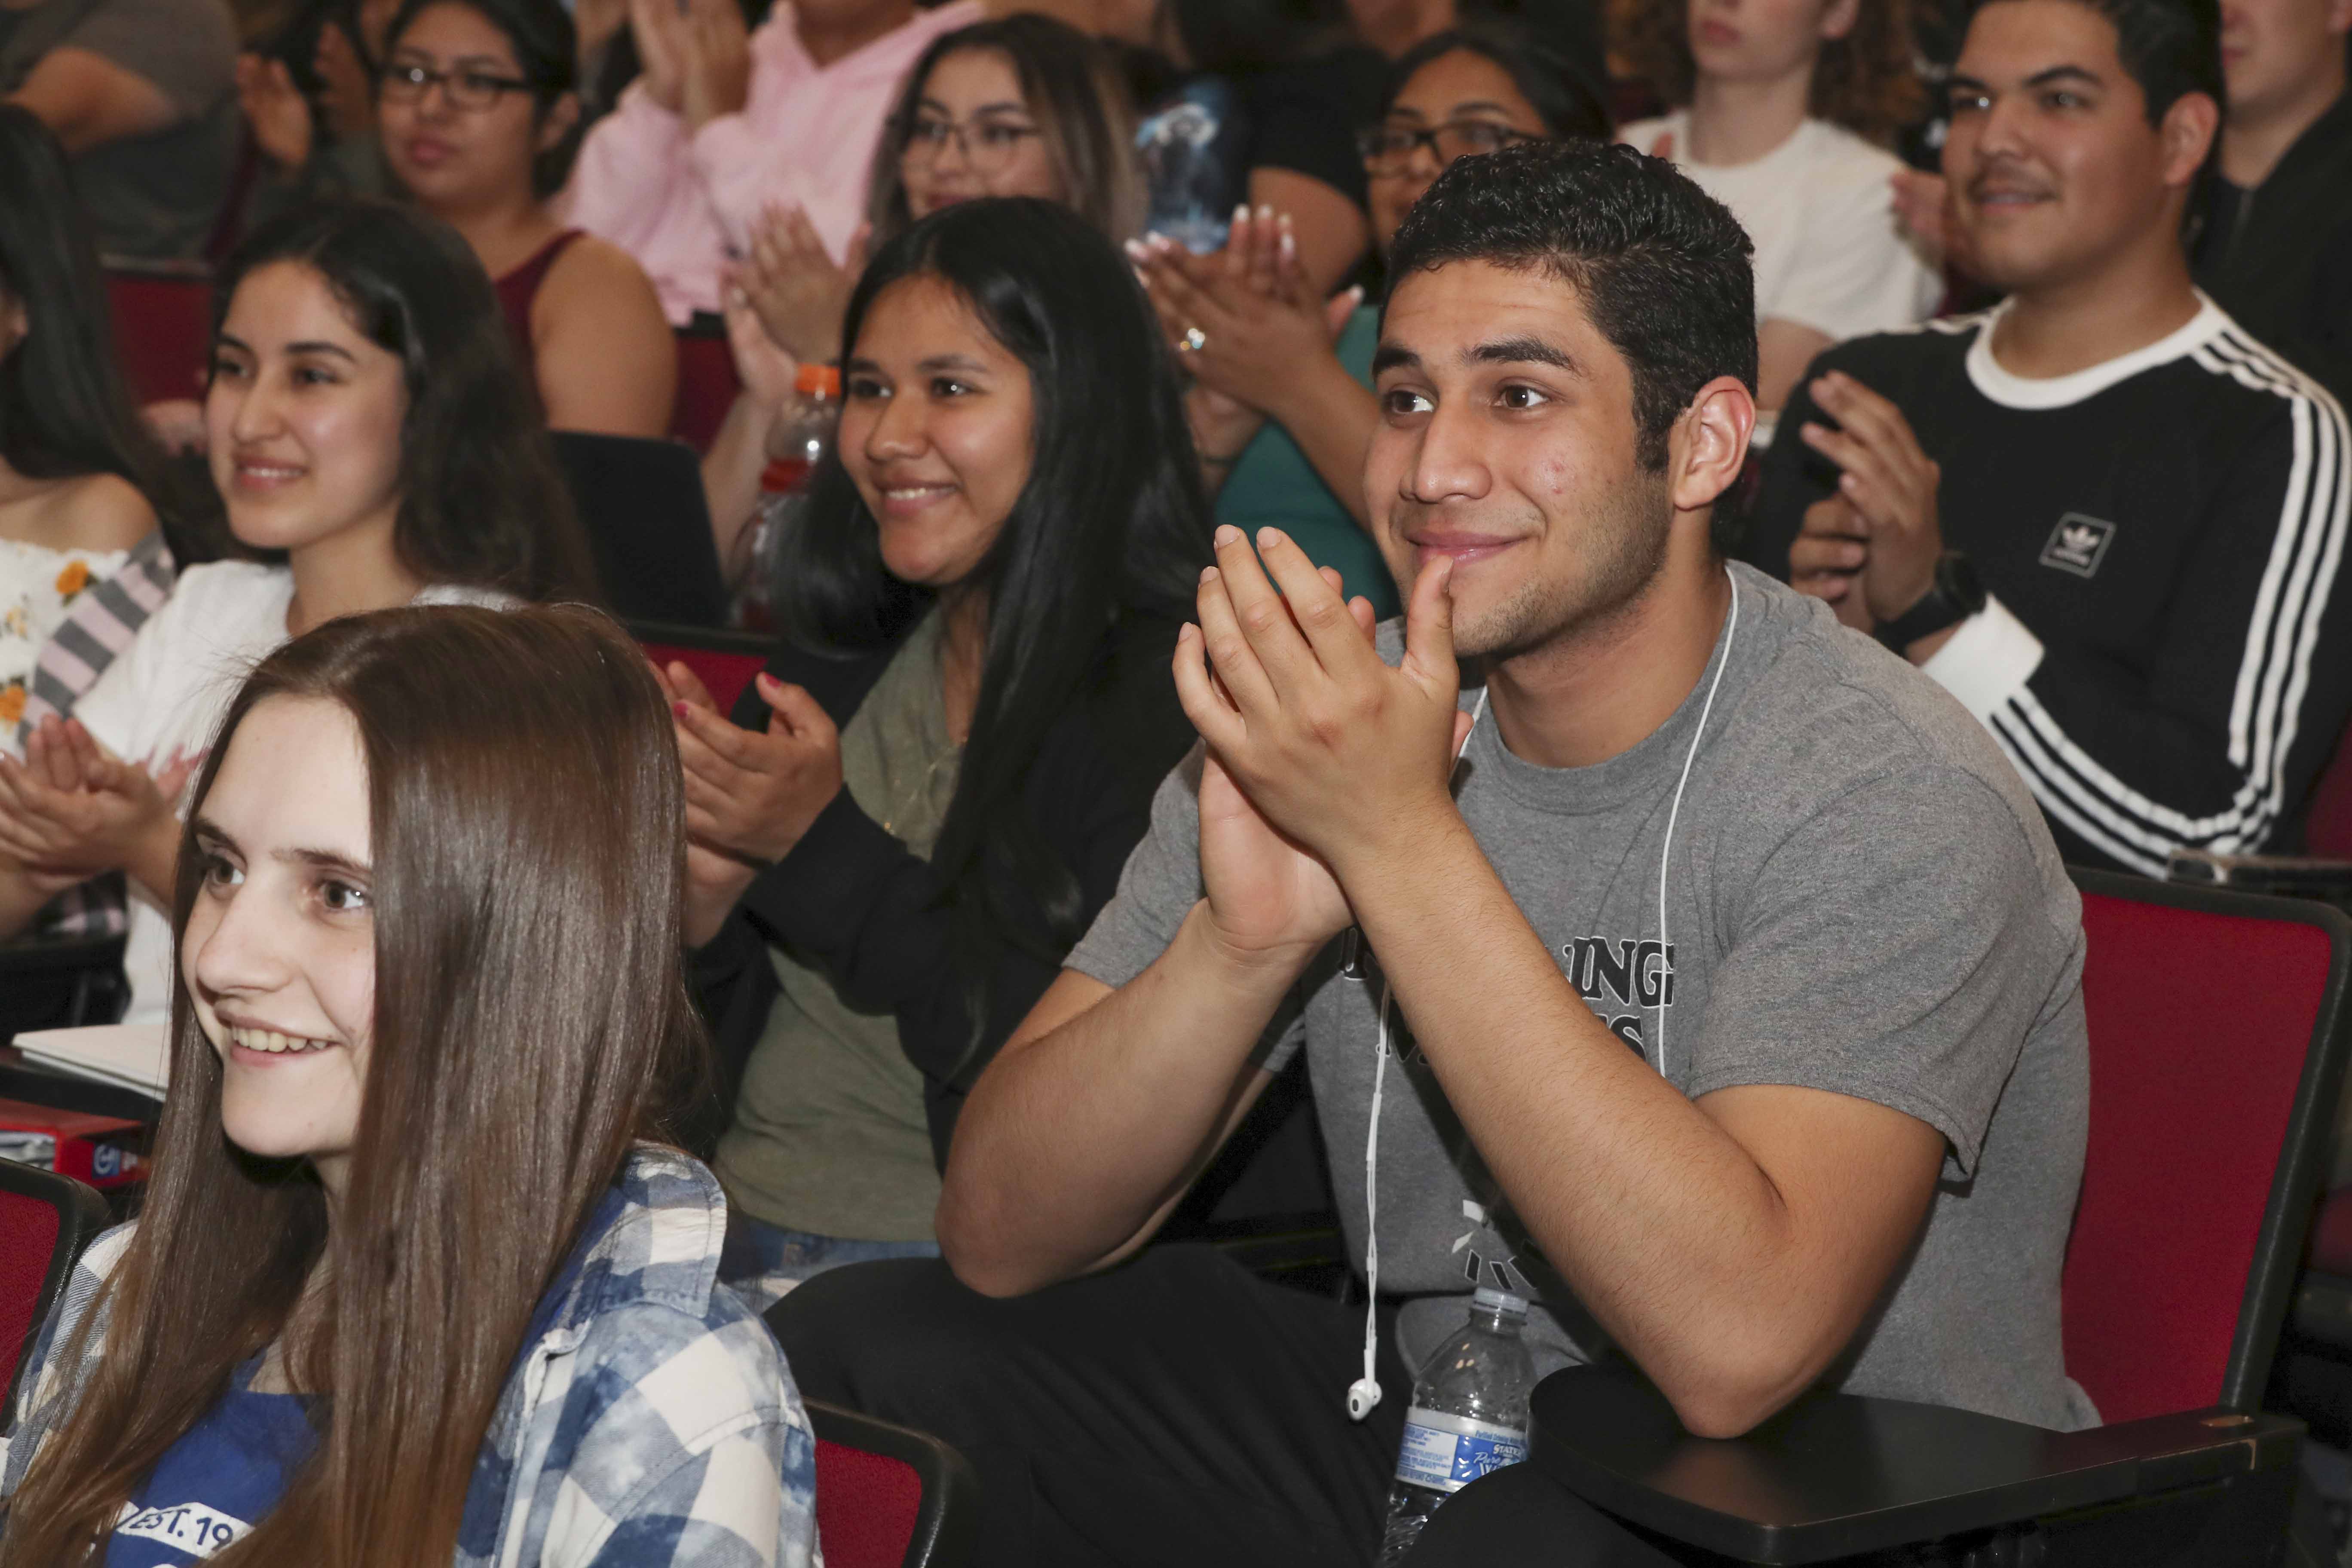 “Kevin is indeed one of the most inspirational and successful educators in the classroom. Do you agree?” Morales asked Grisham’s students, who cheered and applauded their professor. 